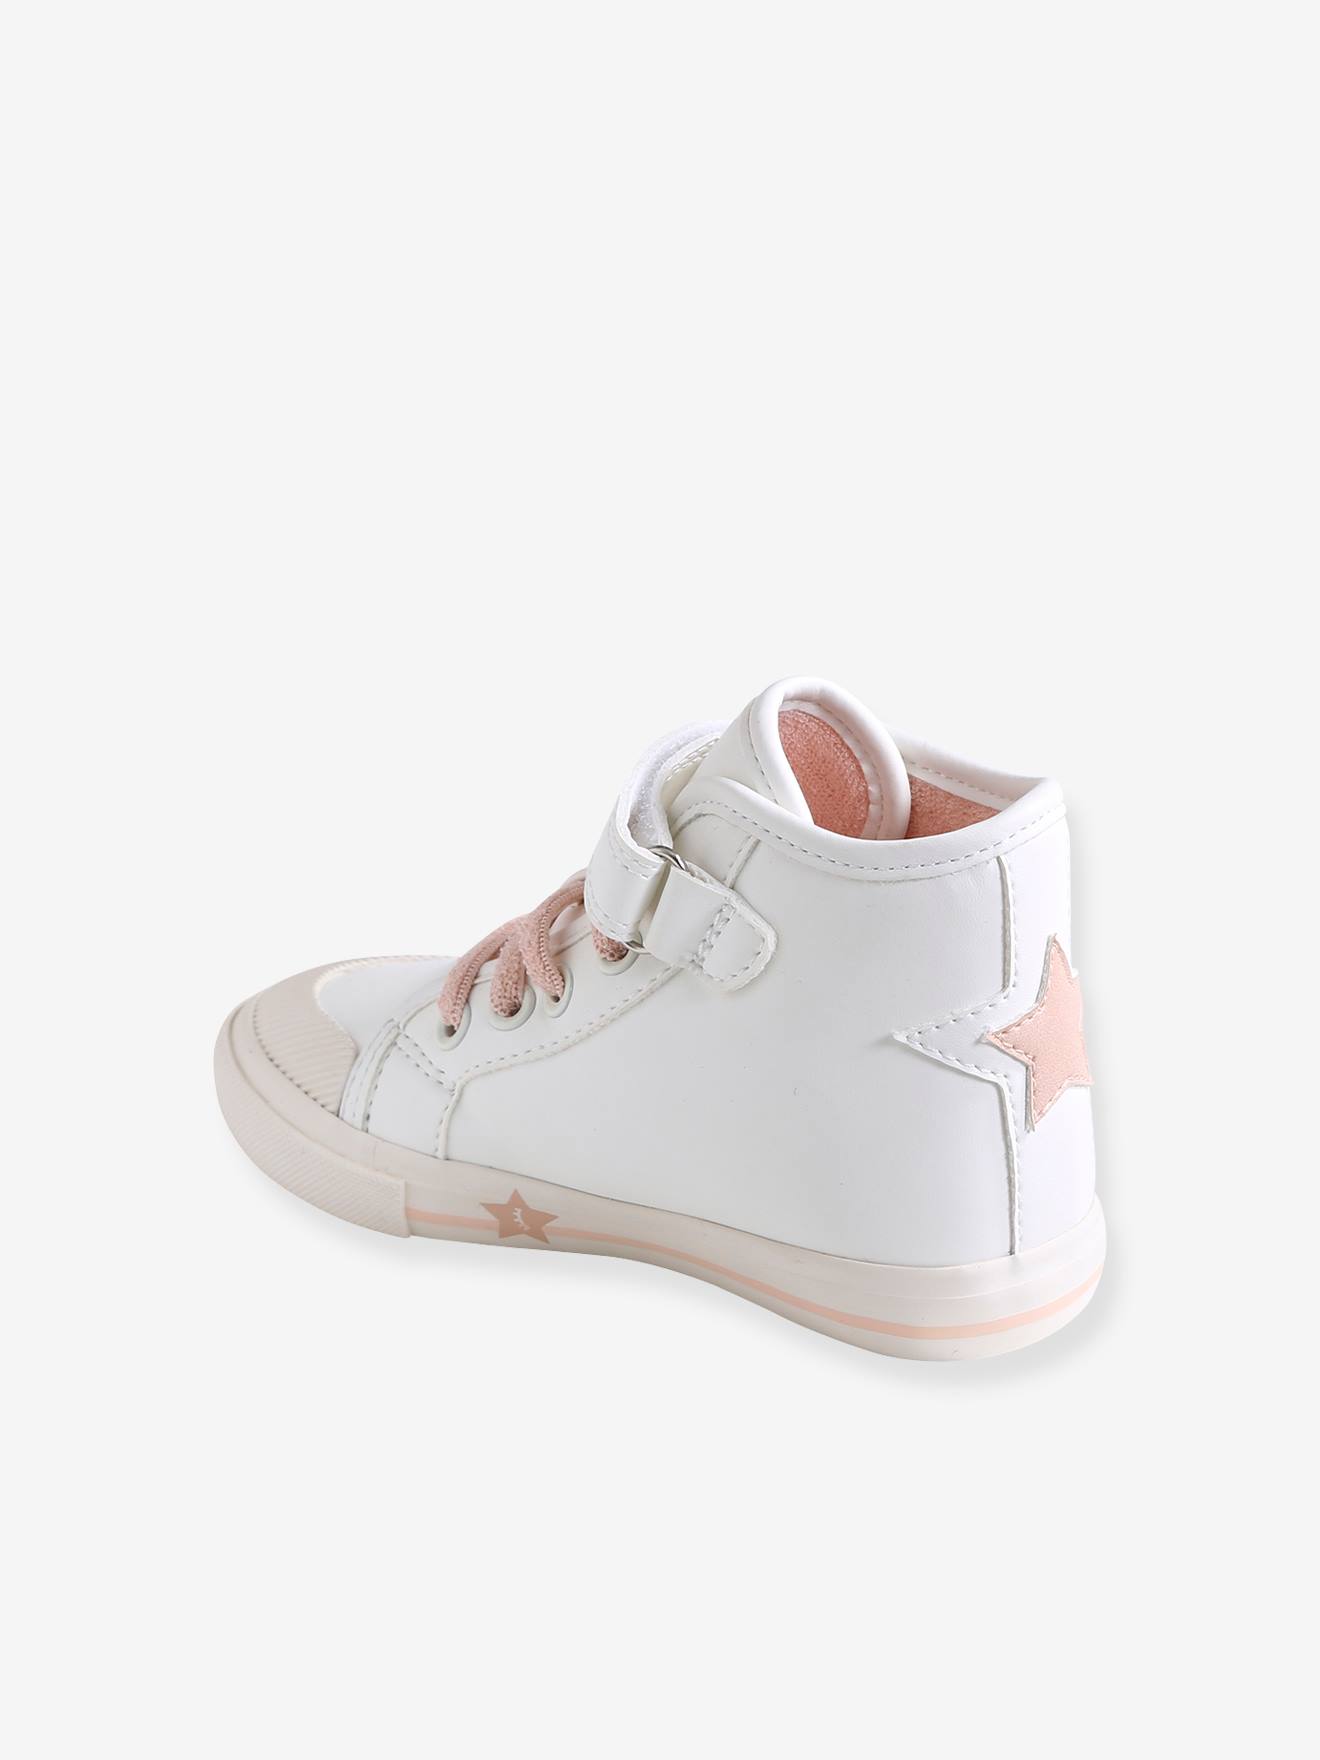 High Top Trainers With Glitter For Girls Designed For Autonomy White Shoes Vertbaudet